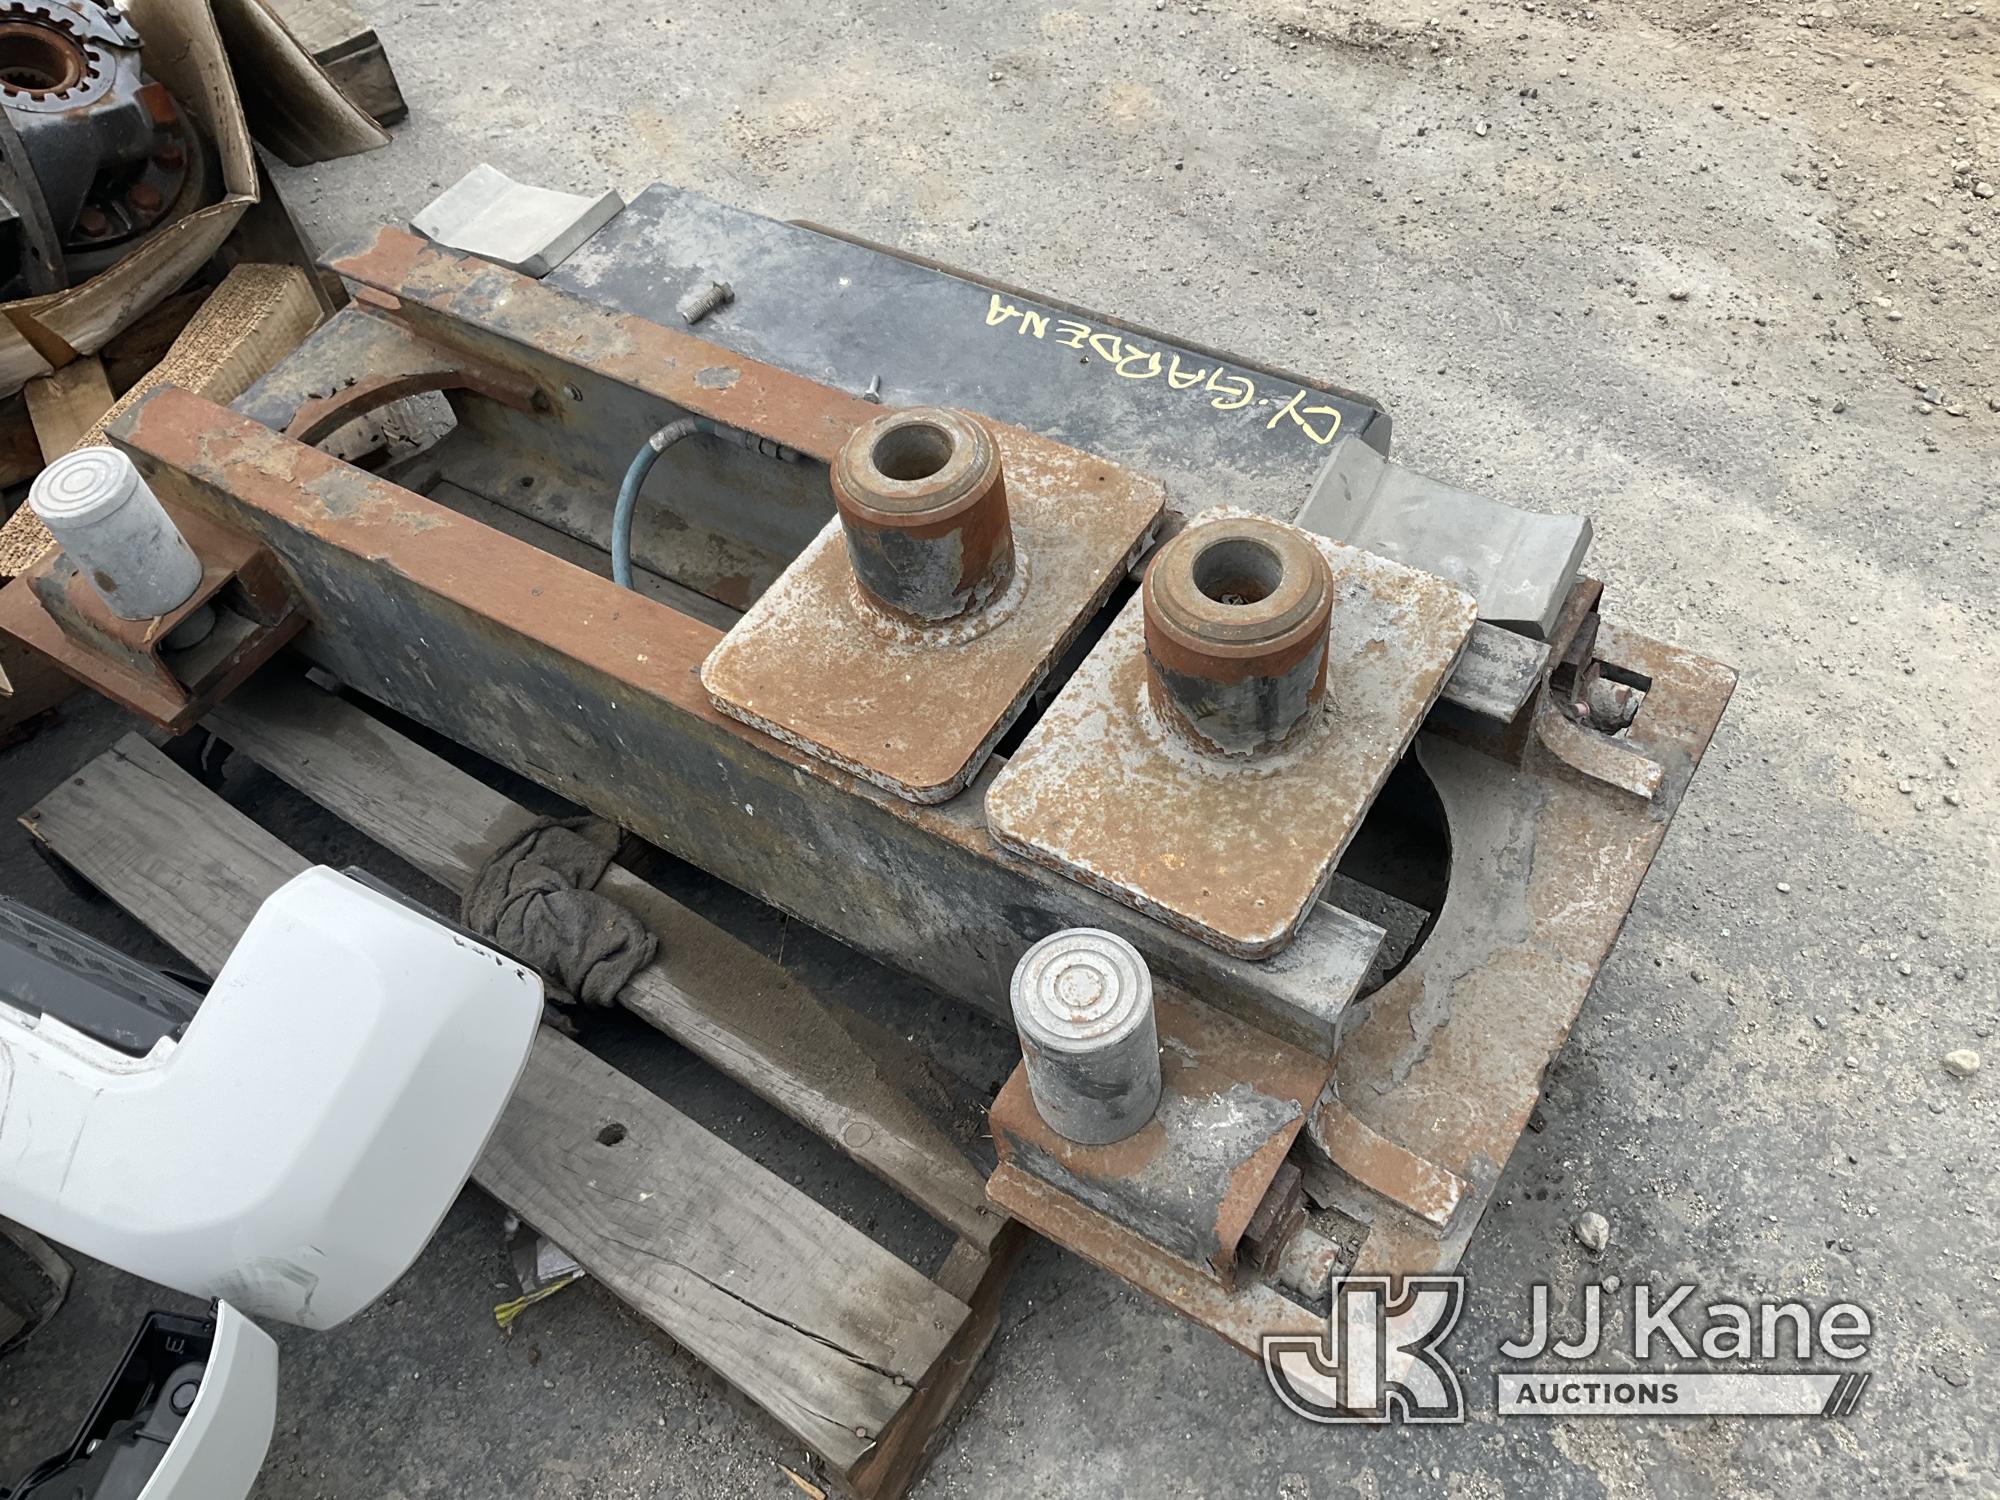 (Jurupa Valley, CA) 1 Rotary Hydraulic Breaker (Used ) NOTE: This unit is being sold AS IS/WHERE IS